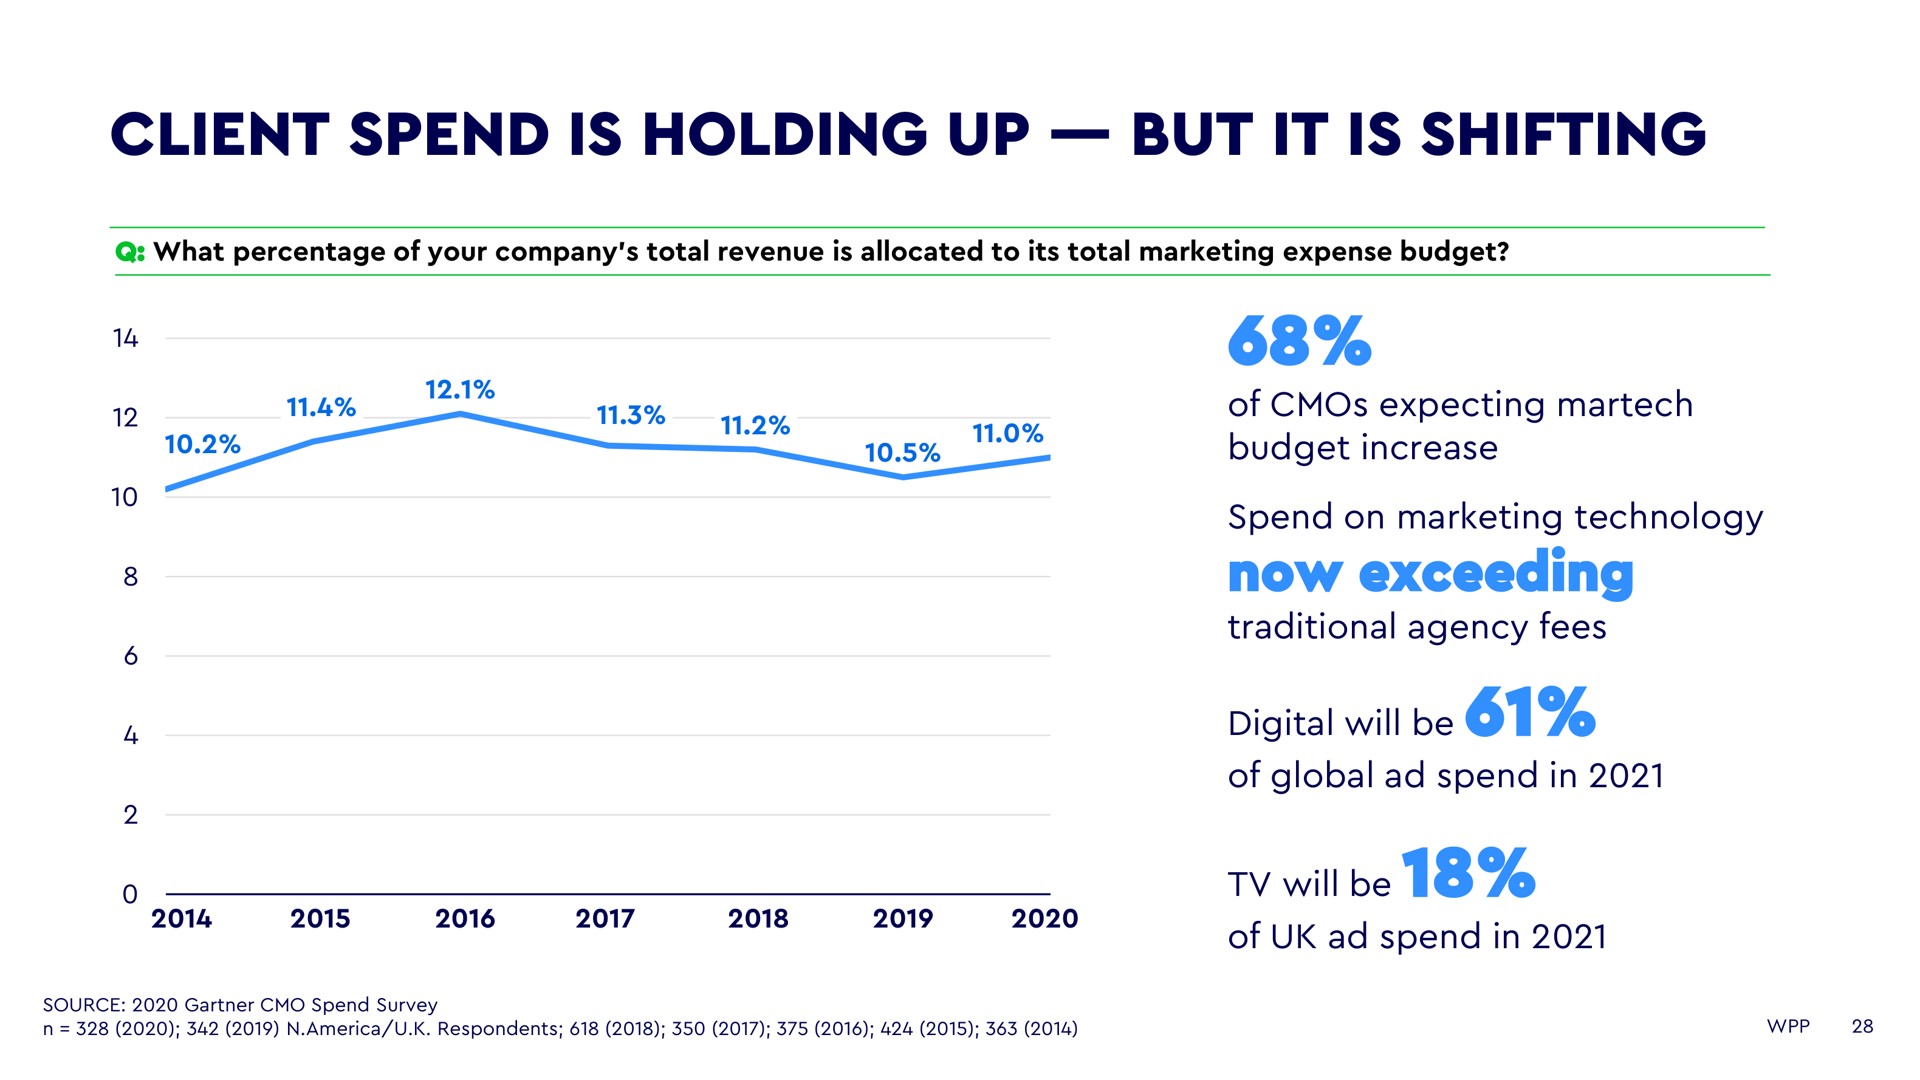 client spend is holding up but it is shifting | WPP